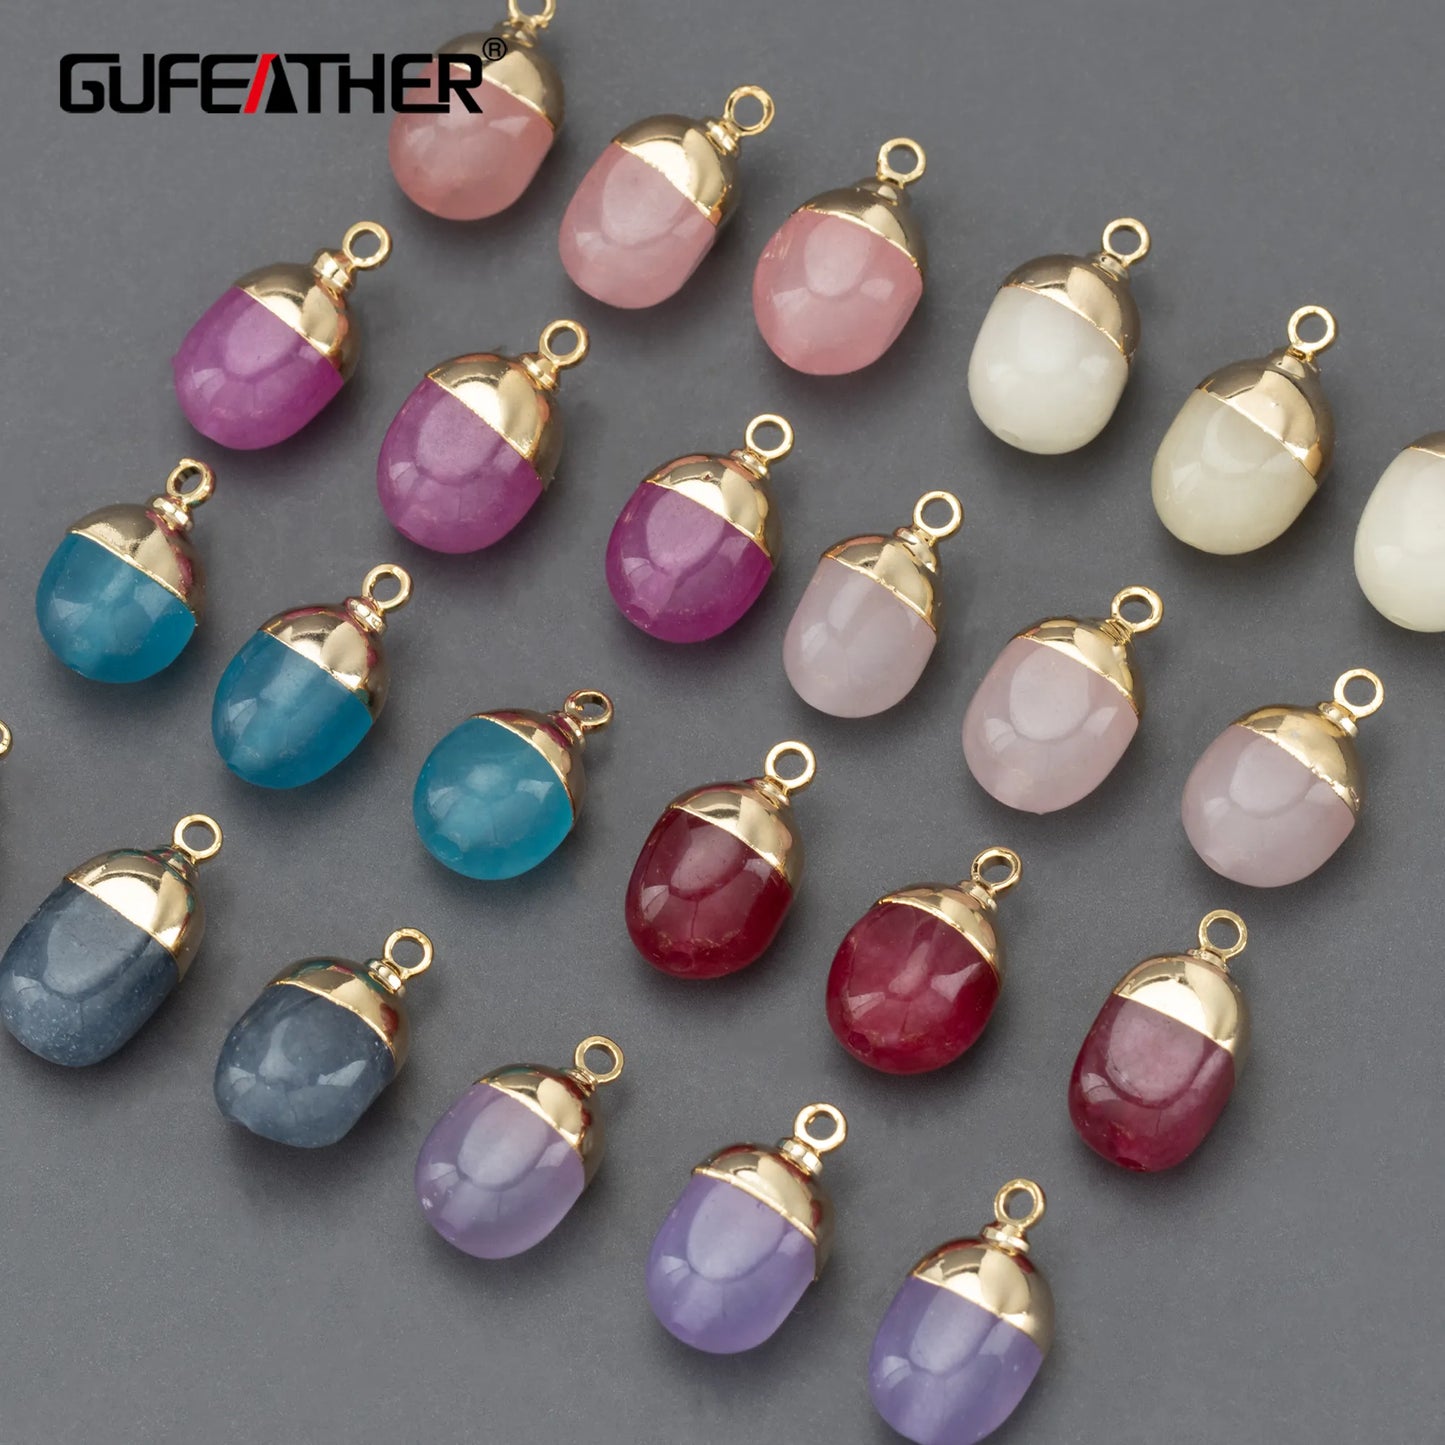 GUFEATHER MA43,jewelry accessories,nickel free,18k gold plated,copper metal,natural stone,jewelry making,diy pendants,6pcs/lot